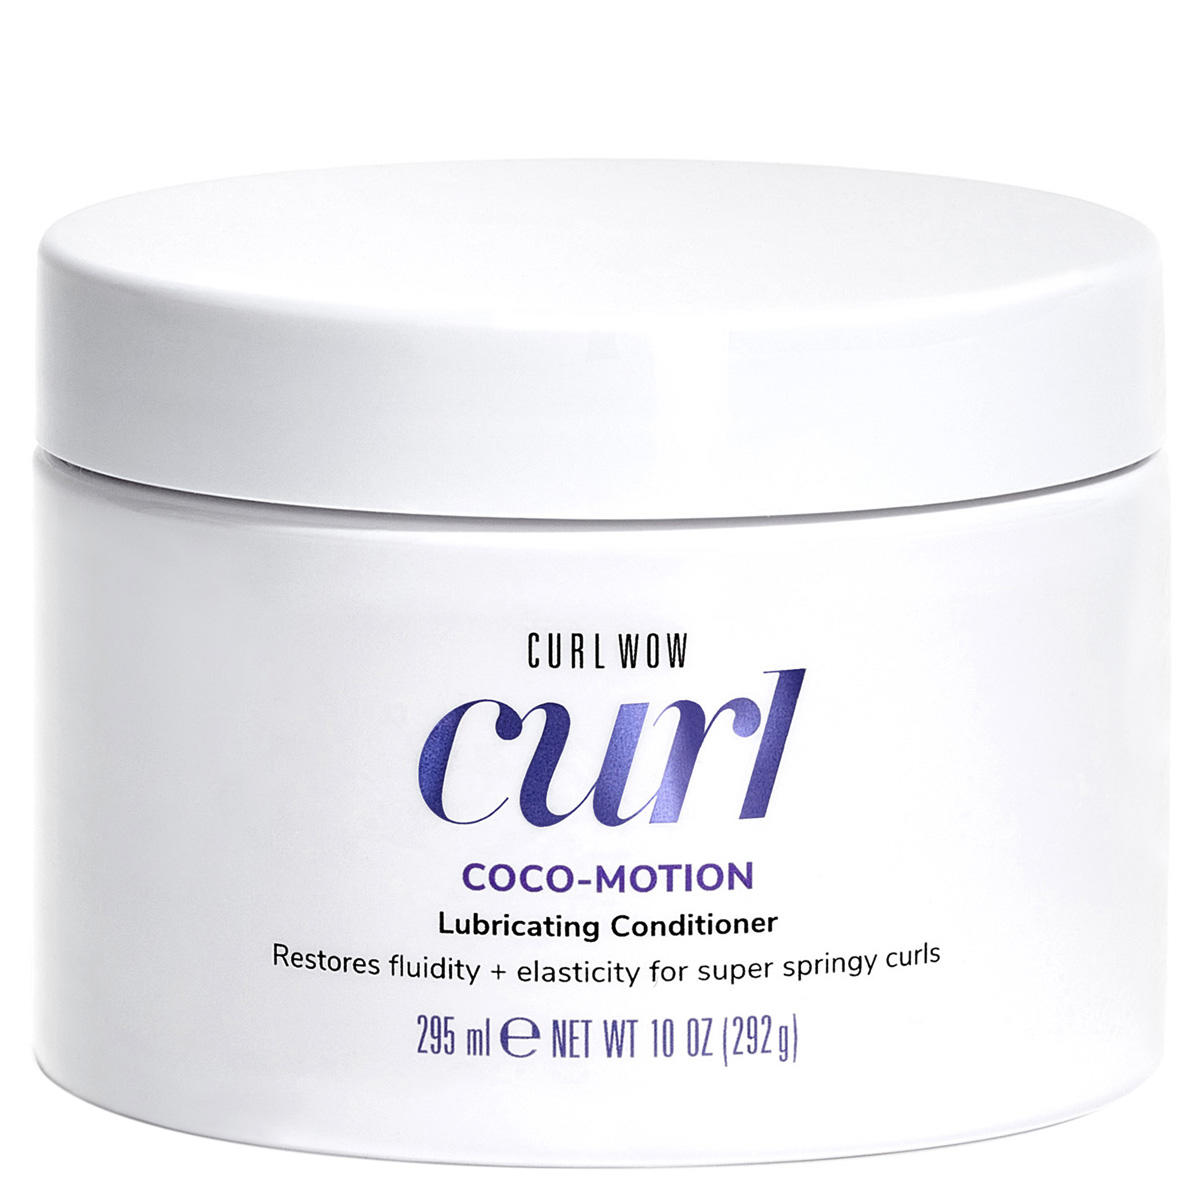 Color Wow Curl Coco-Motion Lubricating Conditioner 295 ml - 1